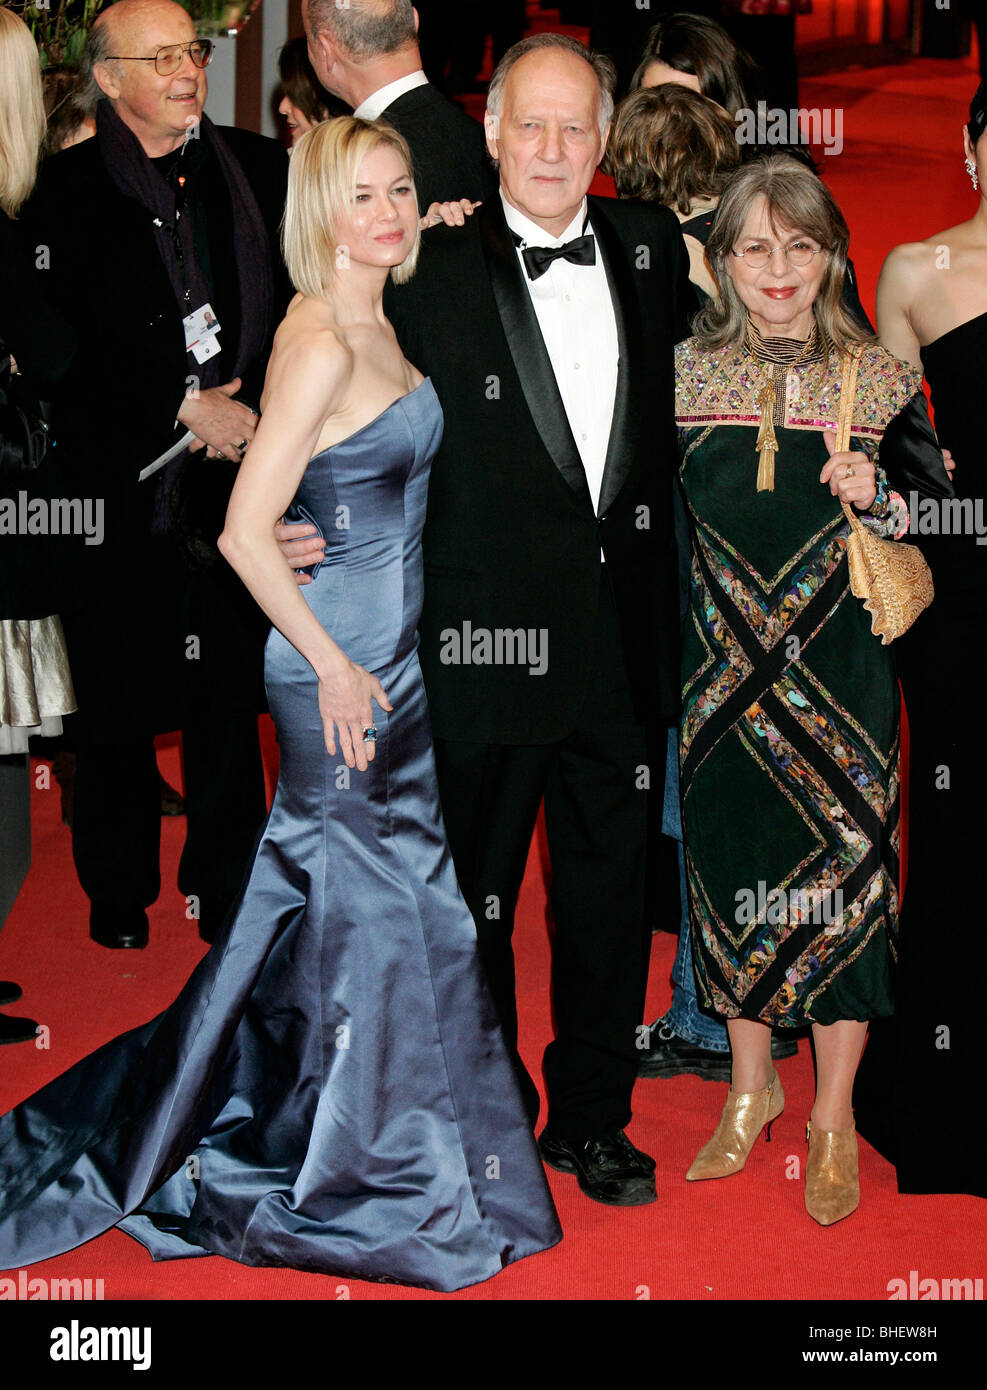 RENEE ZELLWEGER AND WERNER HER ACTRESS AND DIRECTOR BERLINALE PALAST  BERLIN  USA 11/02/2010 Stock Photo